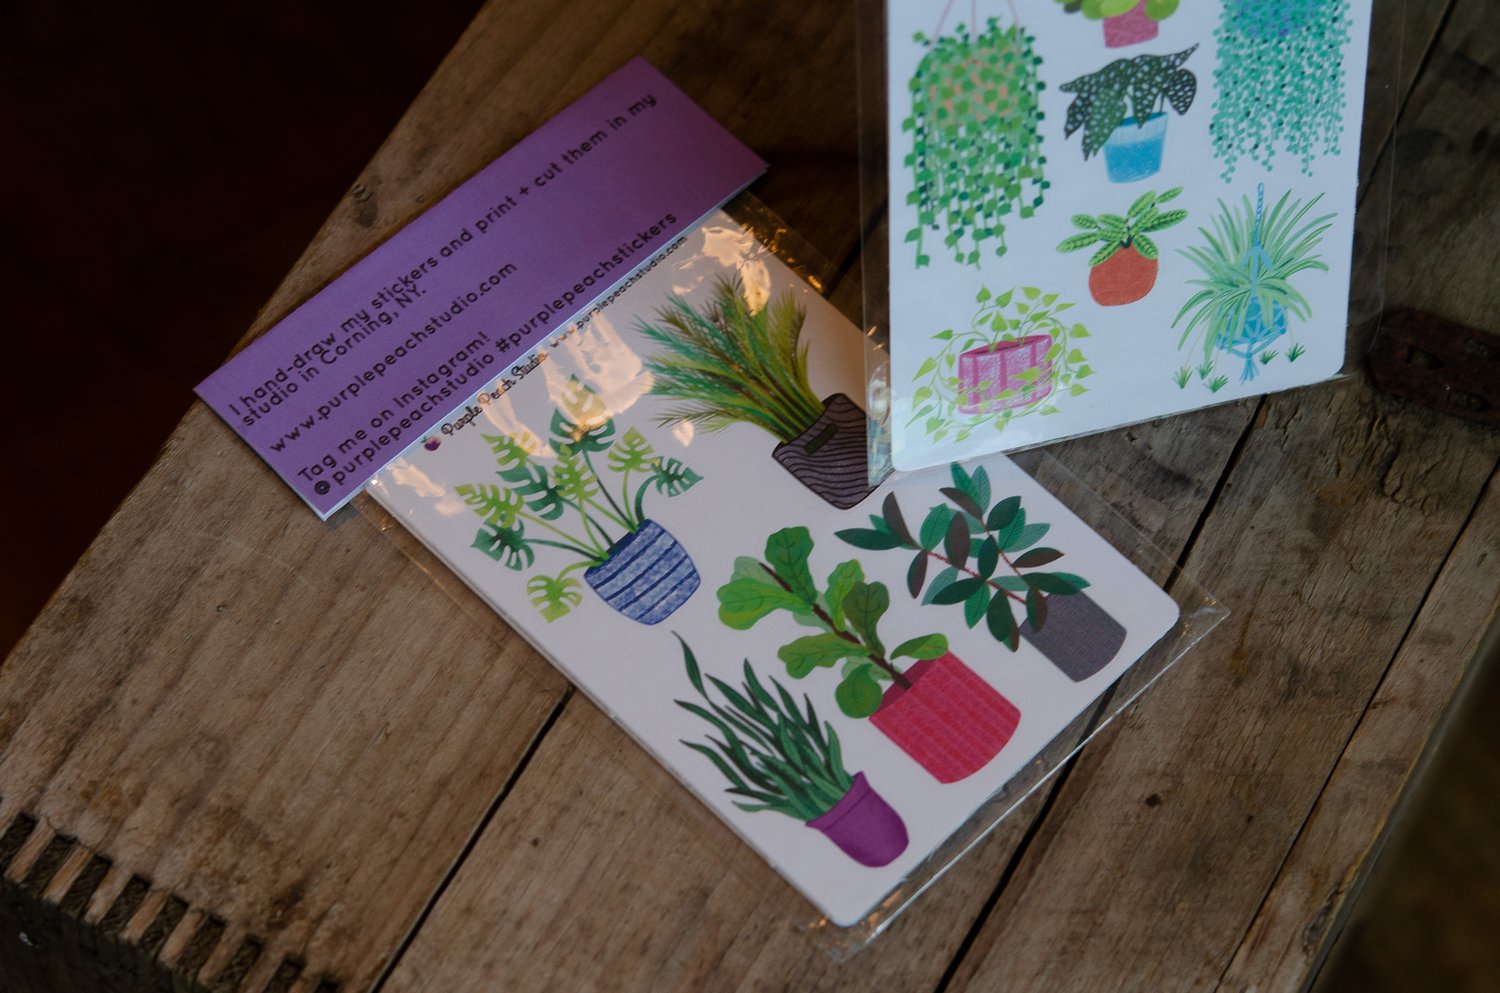 Plant Love: Plants - Stickers  Single Sticker Sheet or Pack of 5 – Cheery  Human Studios